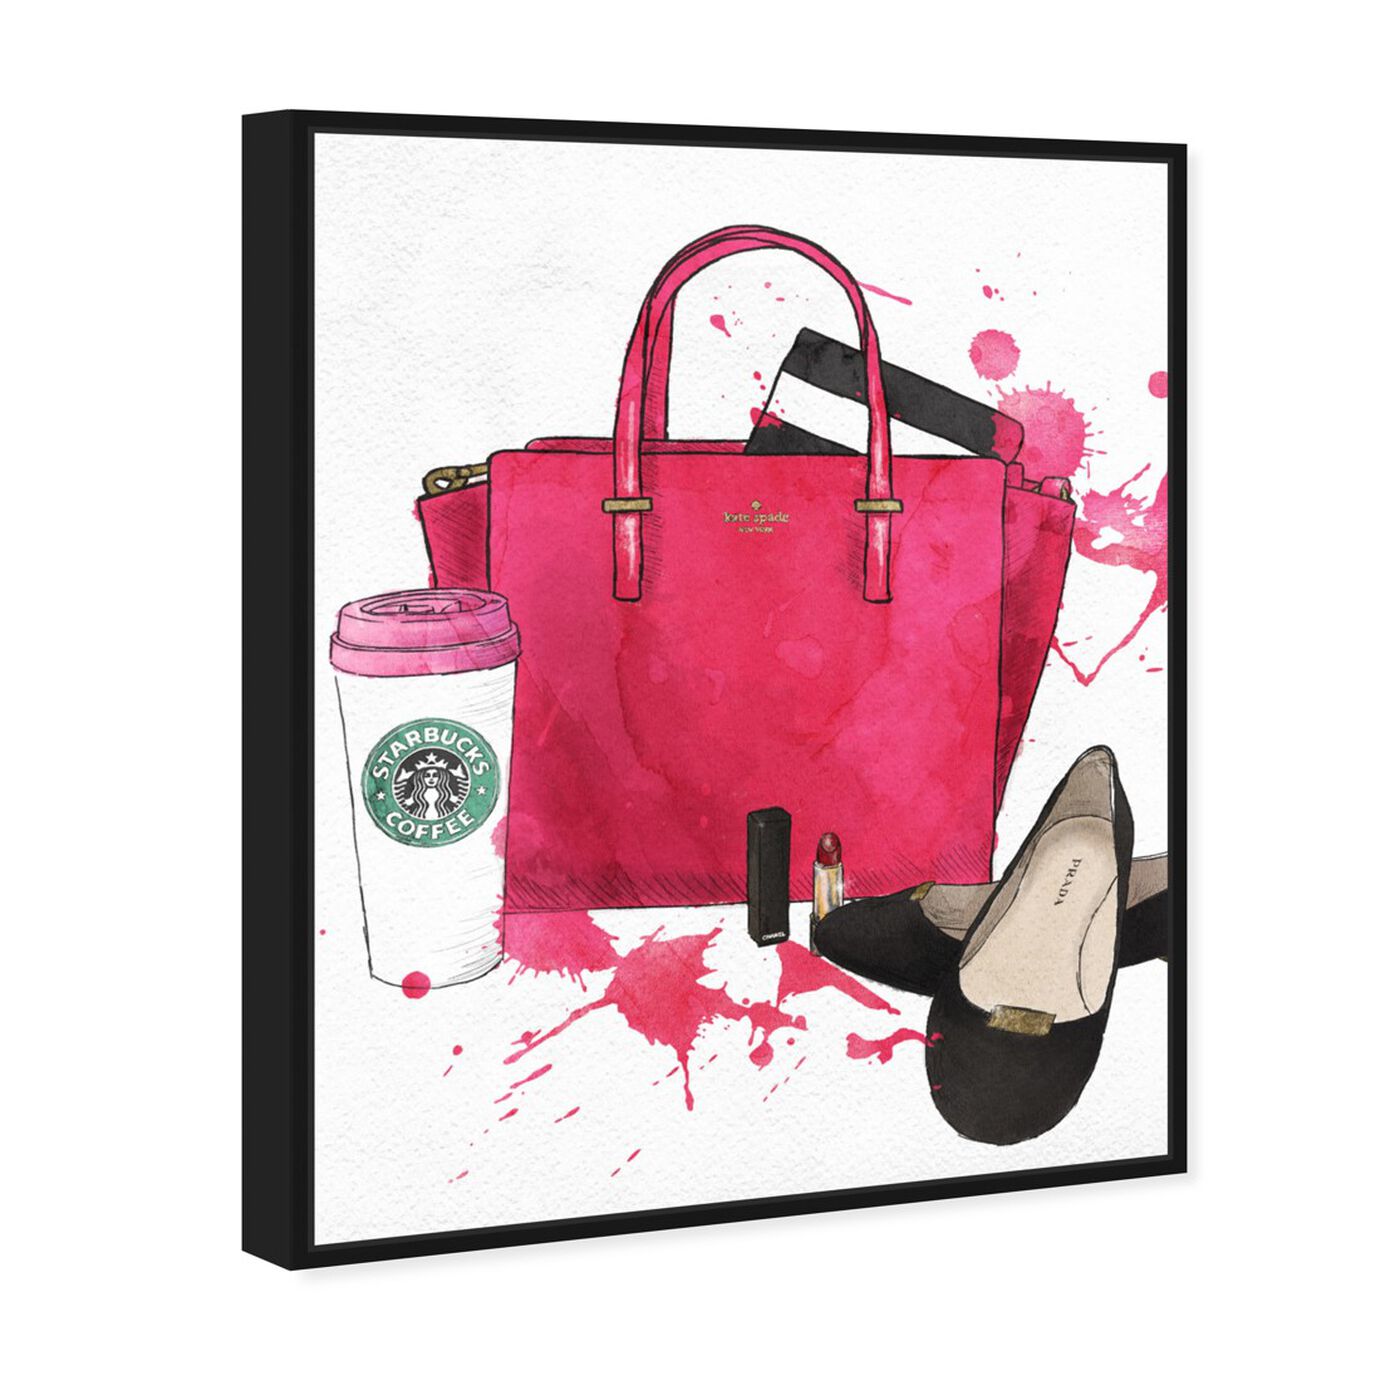 Angled view of Bags, Shoes, and Coffee featuring fashion and glam and handbags art.